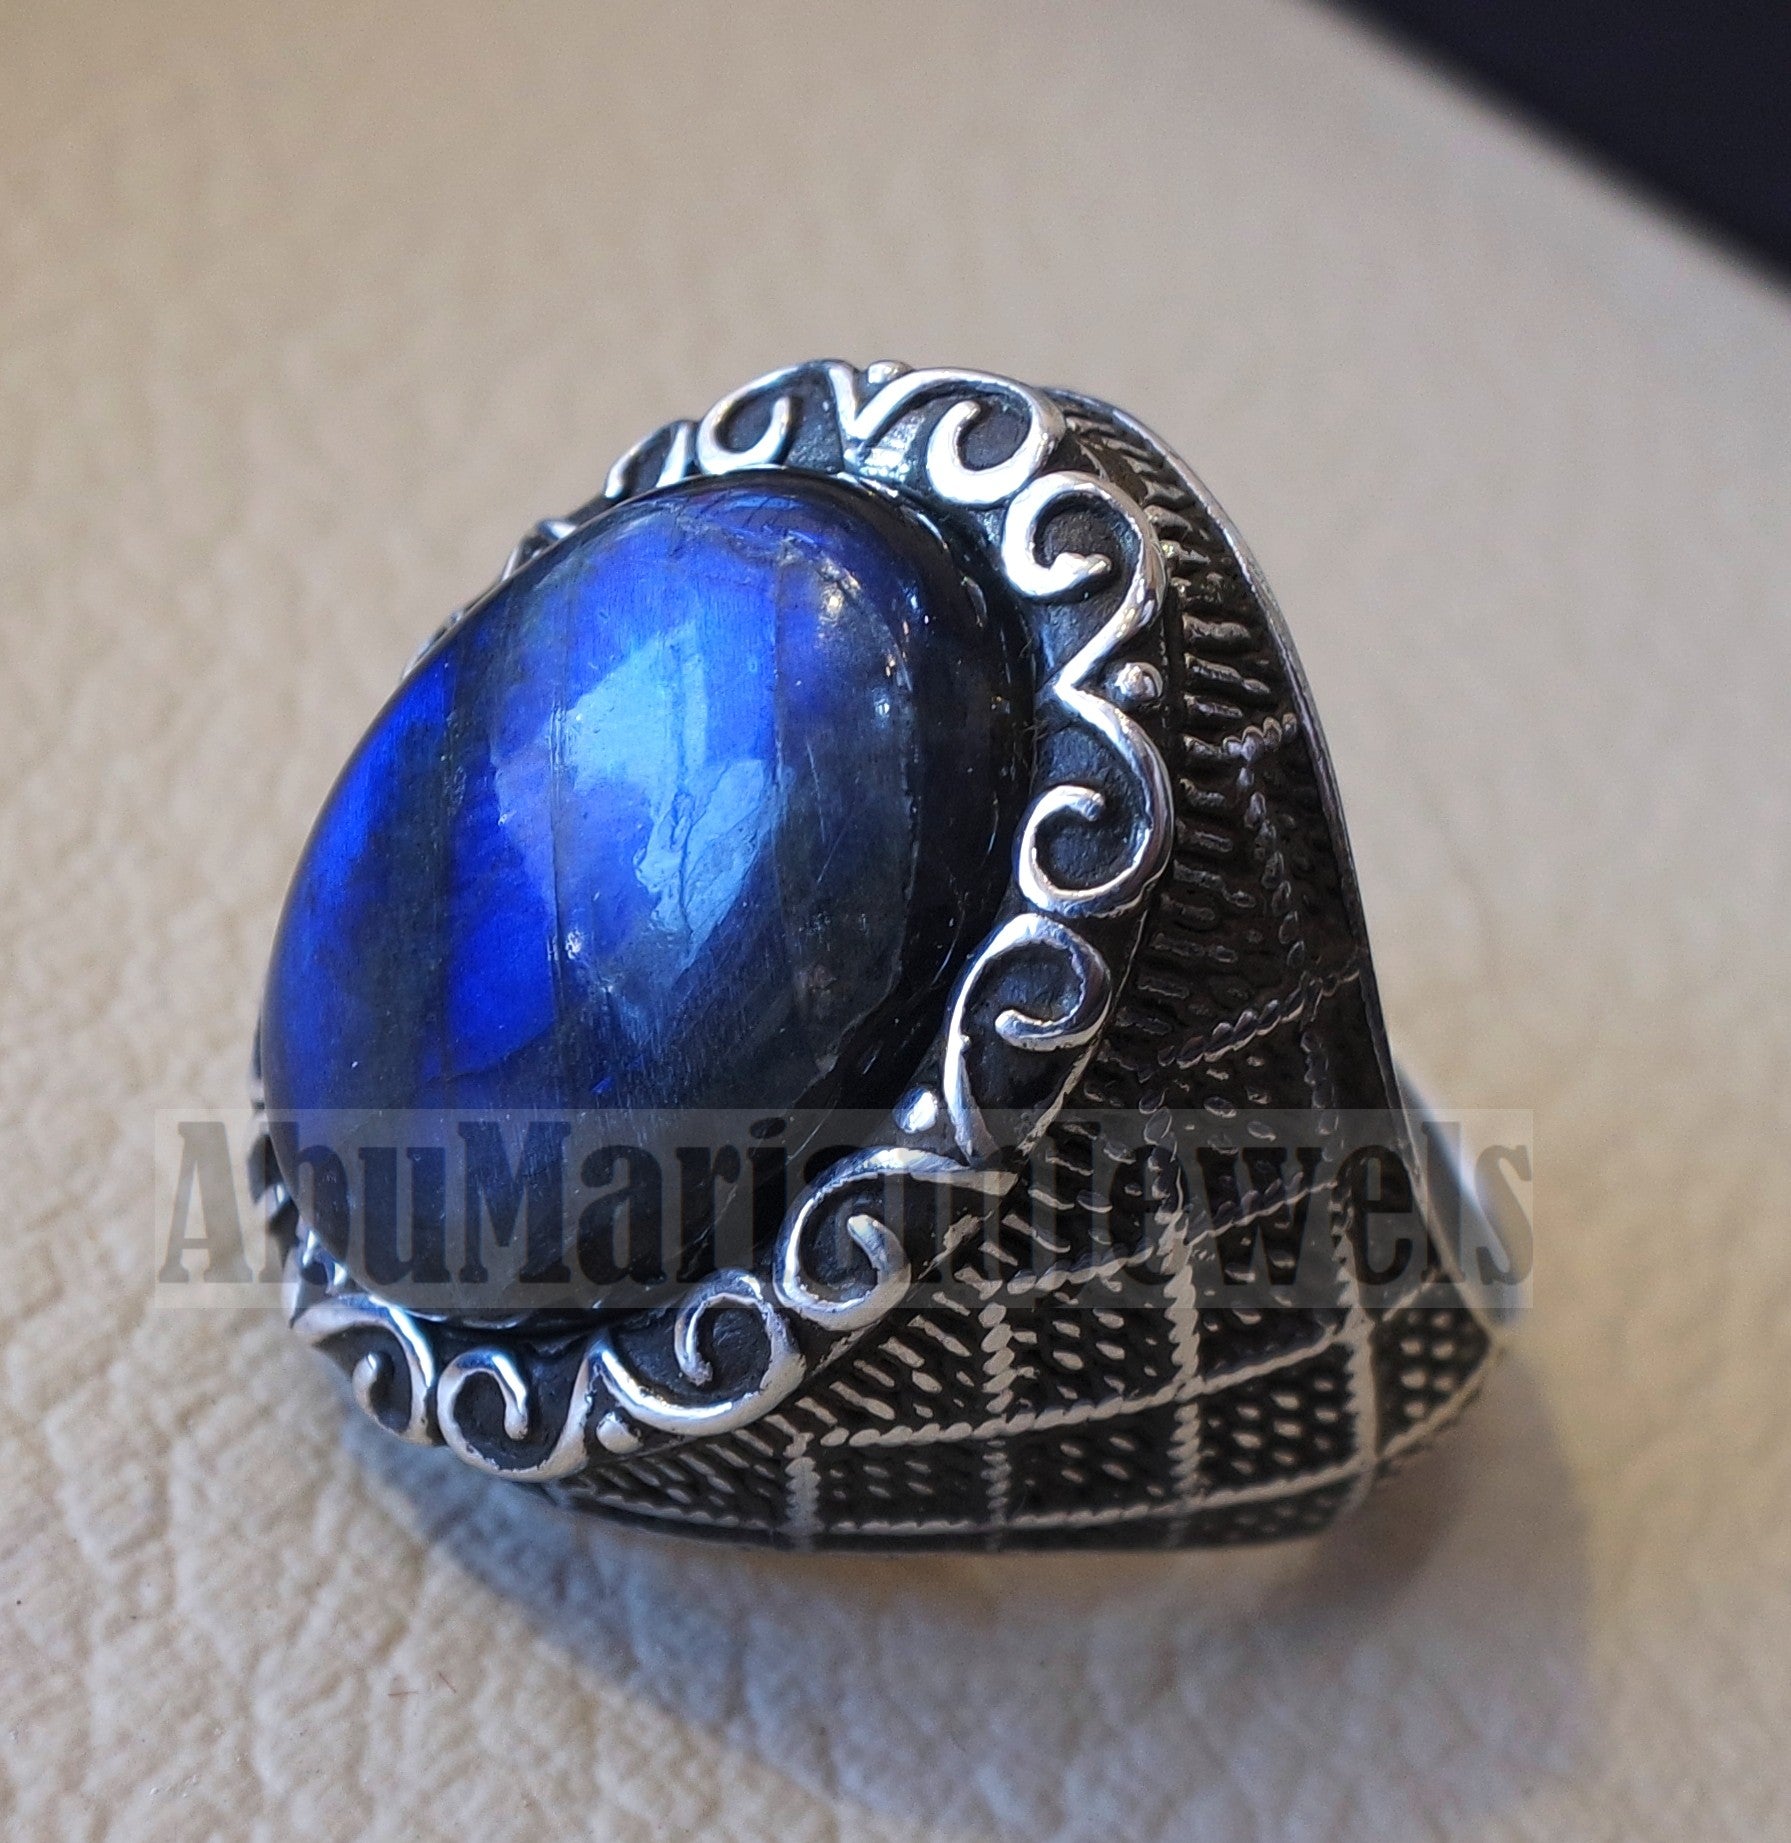 flashy blue labradorite Top quality men ring sterling silver 925 natural stone all sizes jewelry fast shipping ottoman middle eastern style